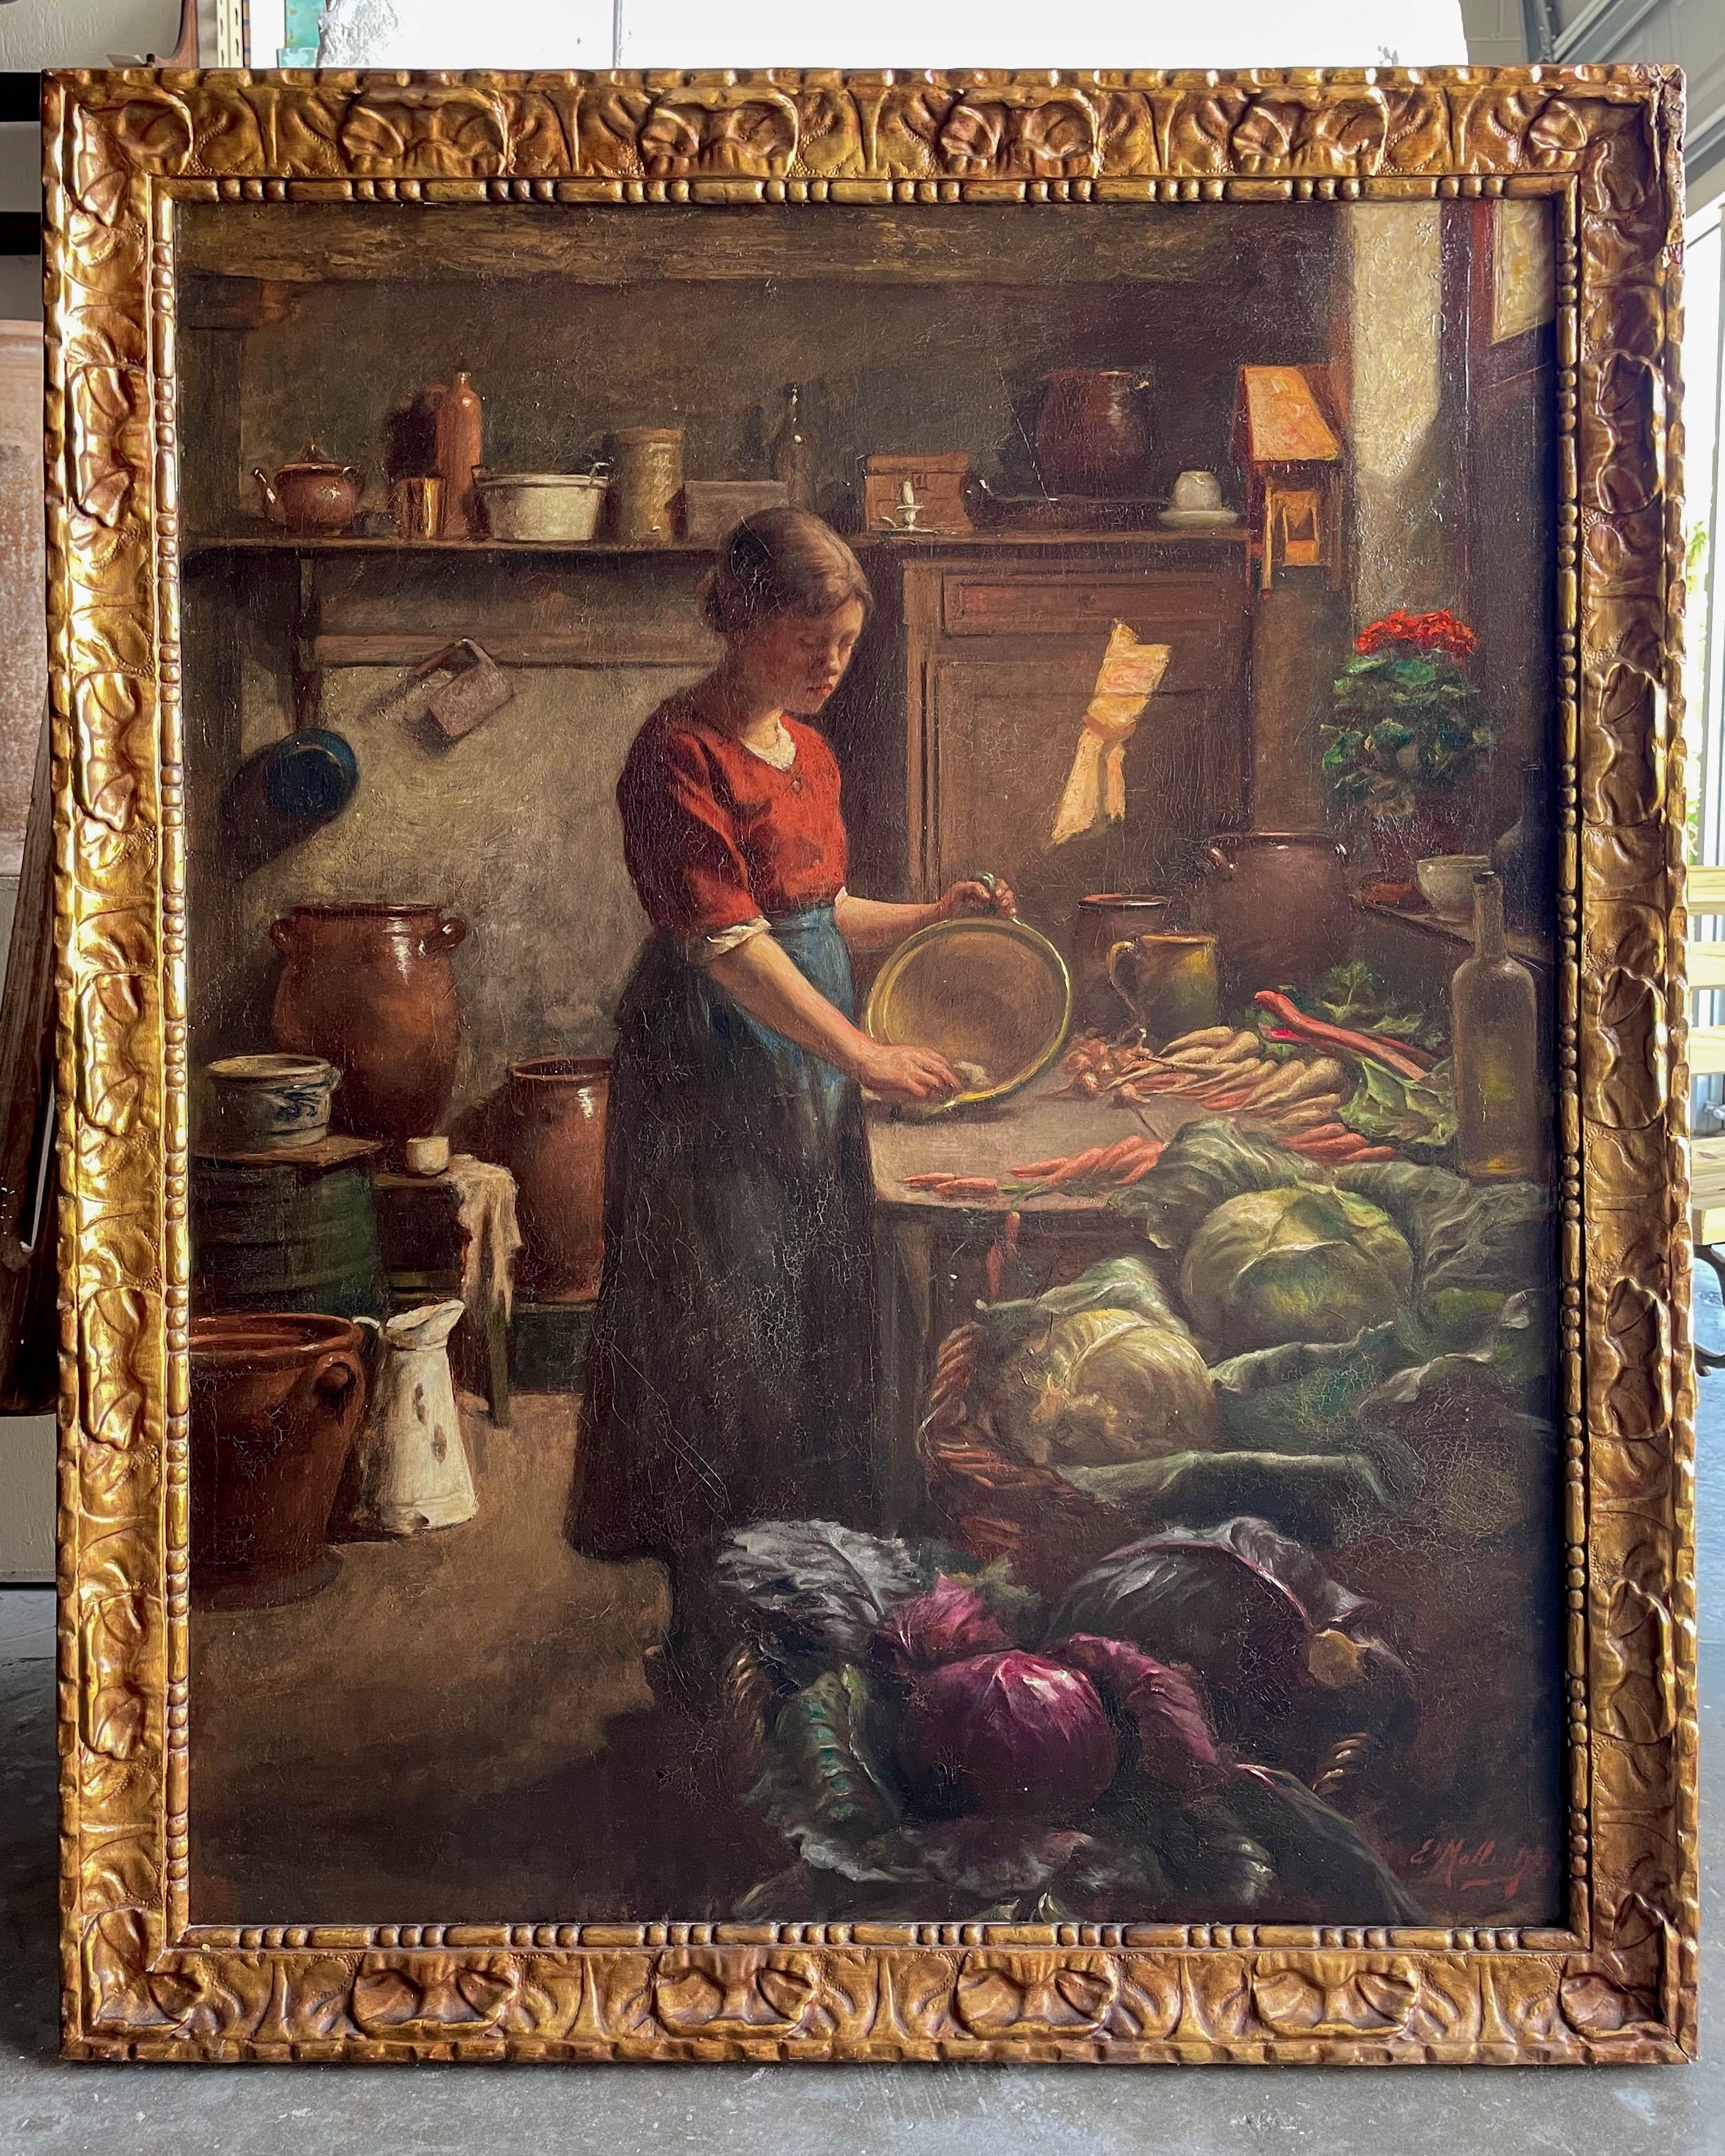 A beautiful 19th Century genre painting in the Dutch style, clearly influenced by Vermeer, with light pouring in from an upper window. Depicting a kitchen maid preparing vegetable on a farm table. Beautiful depiction of various pots, bowls, pitchers